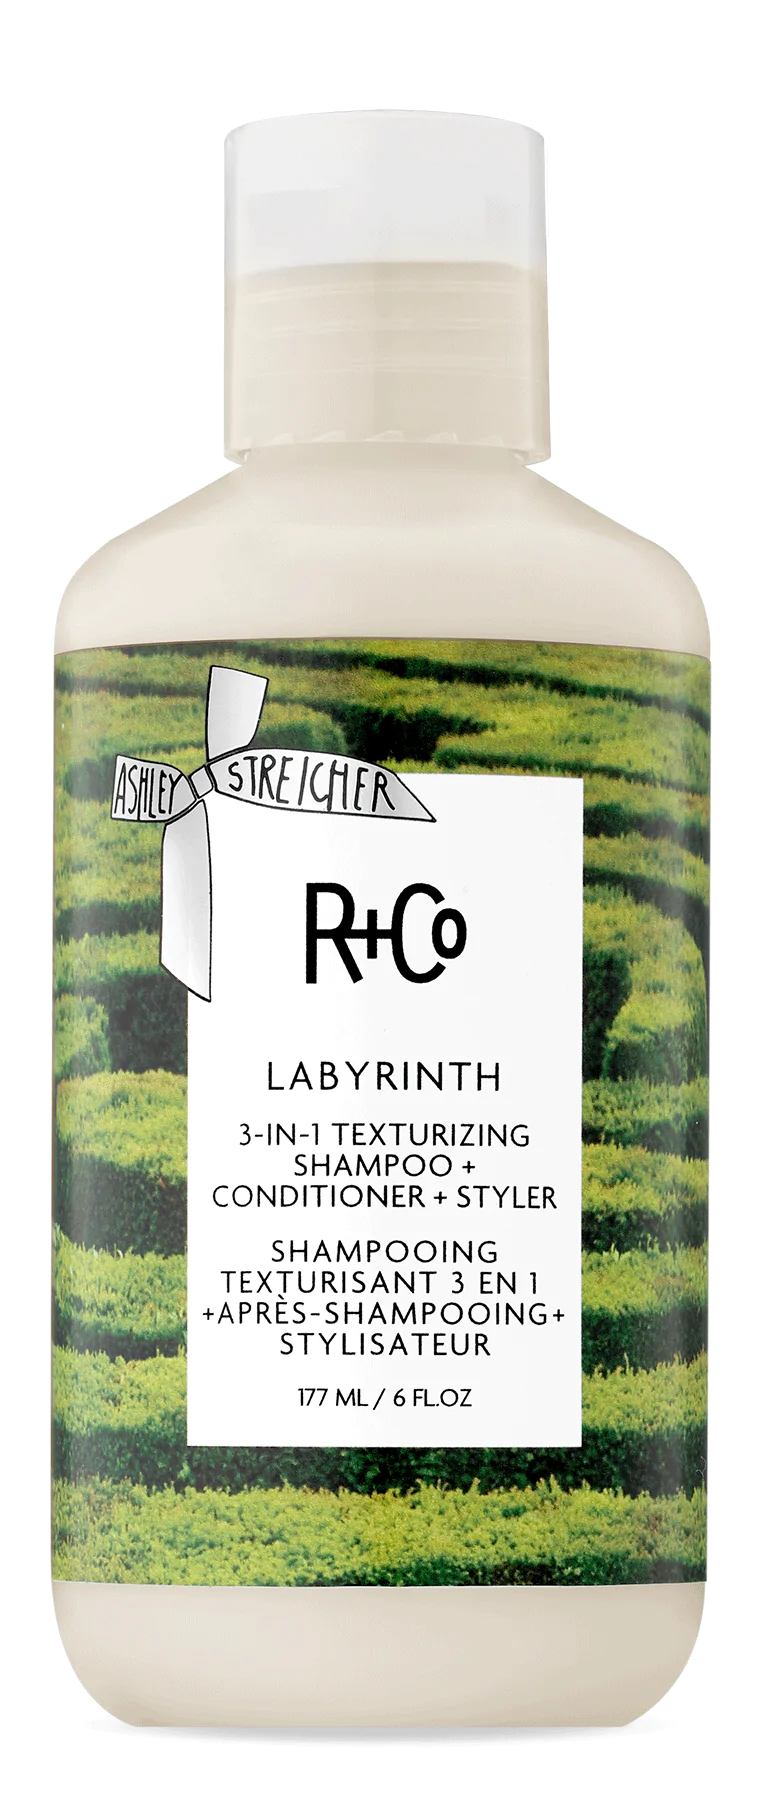 R+CO Labyrinth 3-in-1 Texturizing Shampoo+Conditioner+Styler - Totality Medispa and Skincare